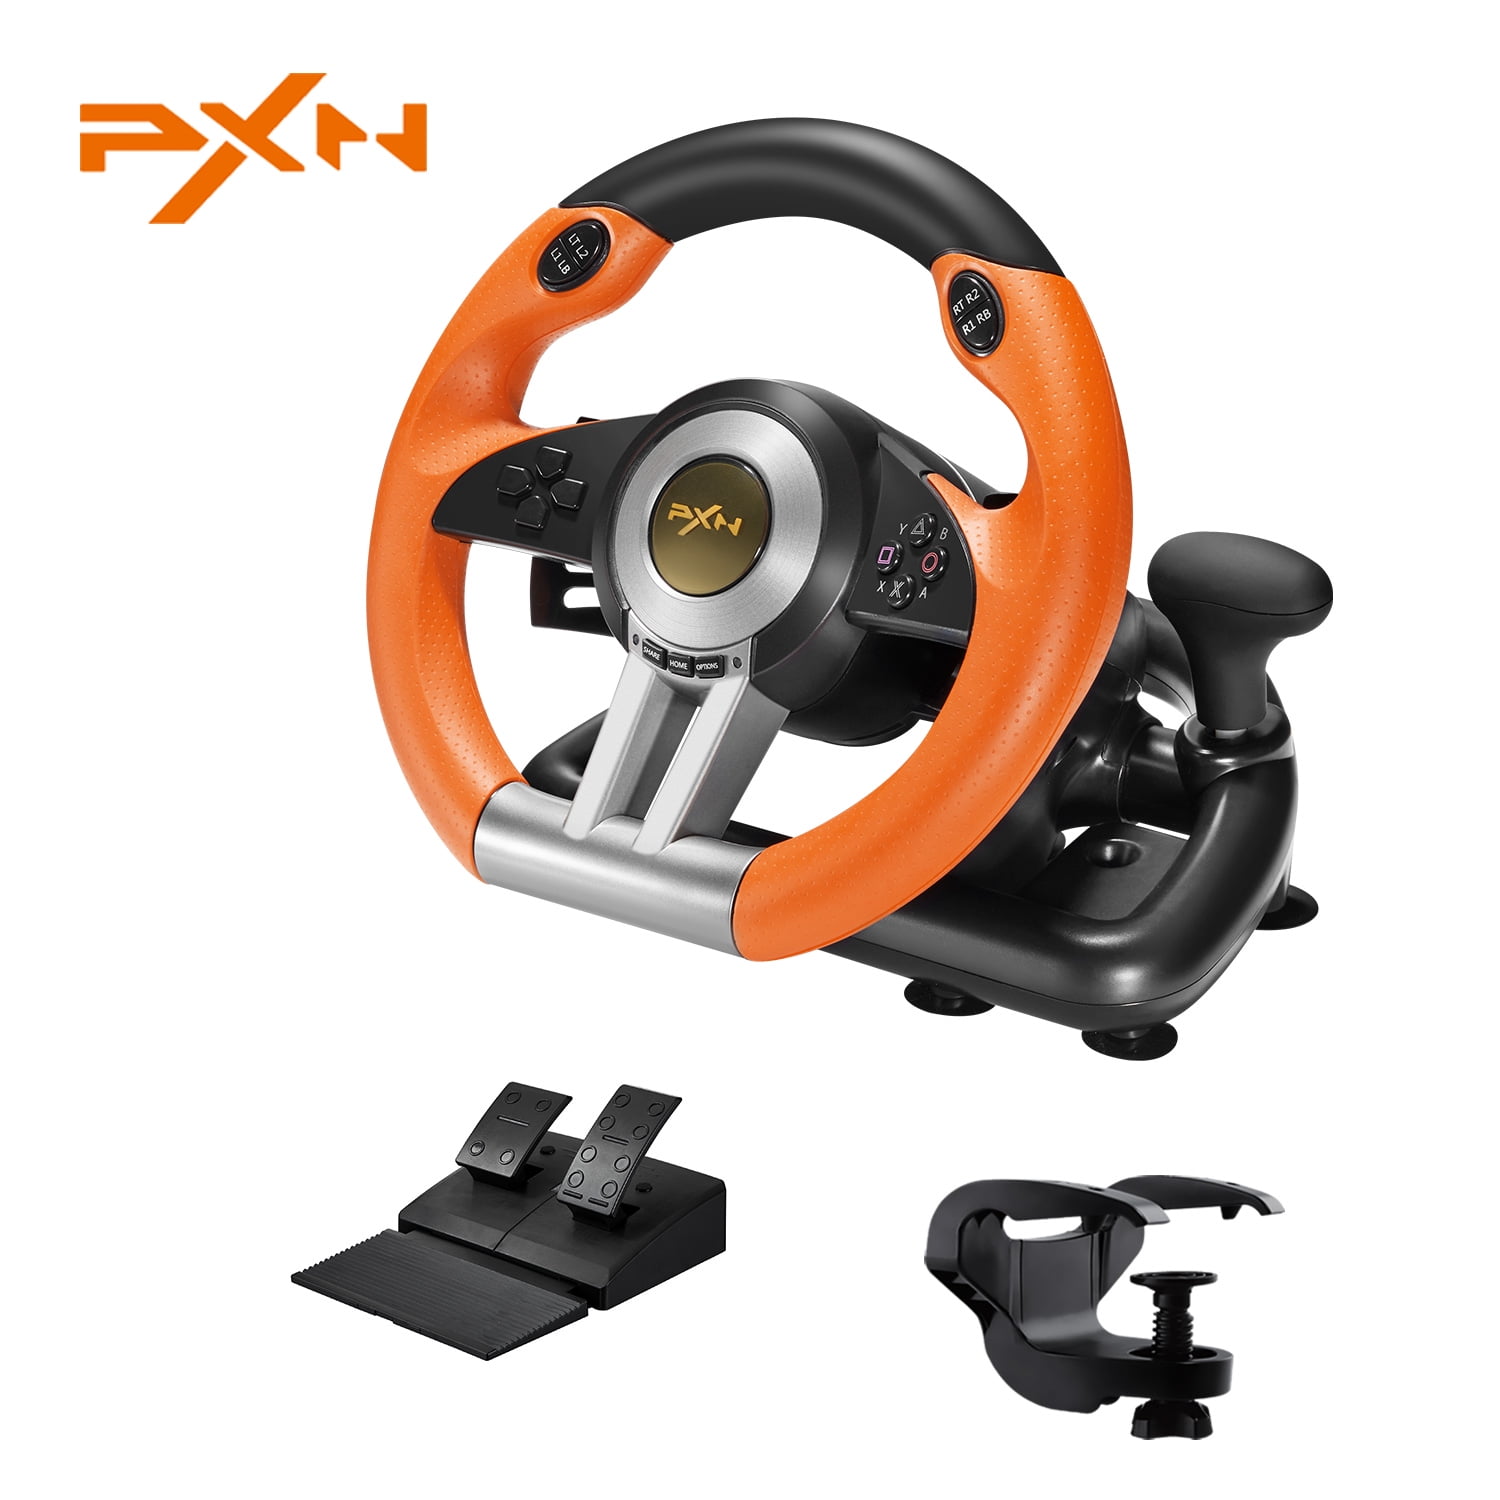 Steering Wheel - PXN V3II 180° Gaming Racing Wheel Driving Wheel, with Linear Pedals and Racing Paddles for Xbox Series X|S, PC, PS4, Xbox One, Nintendo Switch - Orange - Walmart.com